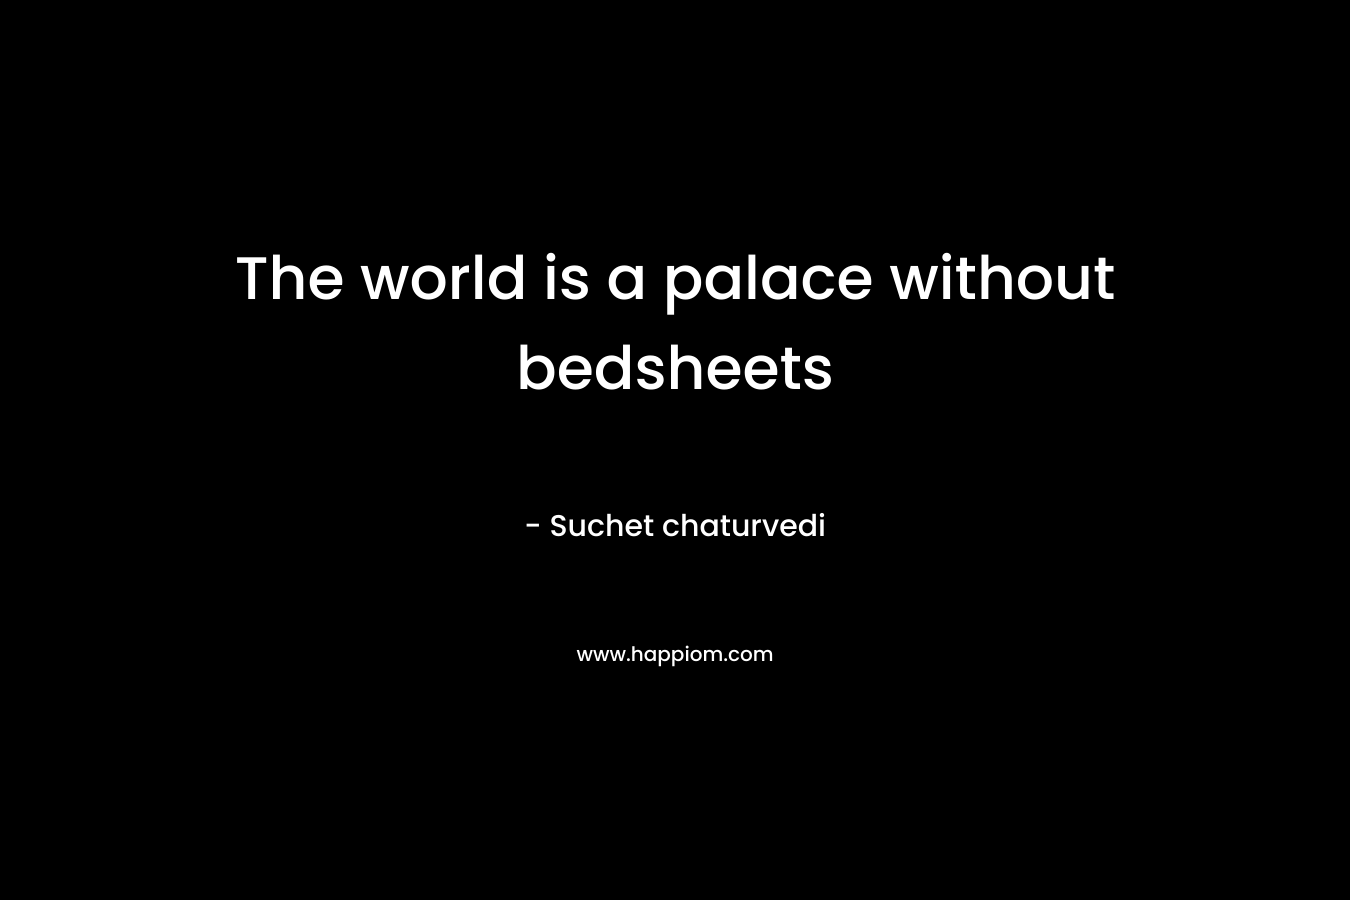 The world is a palace without bedsheets